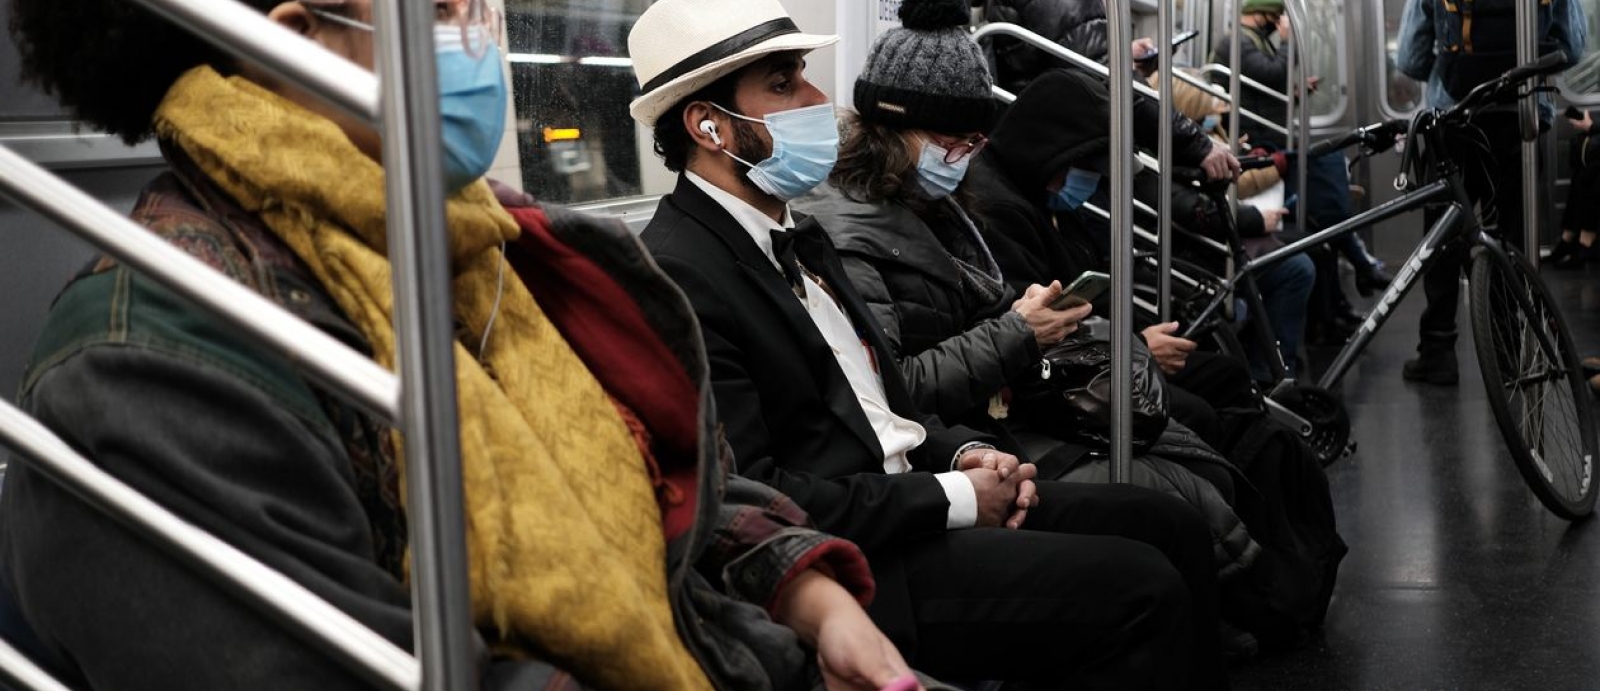 An image of riders on a subway train